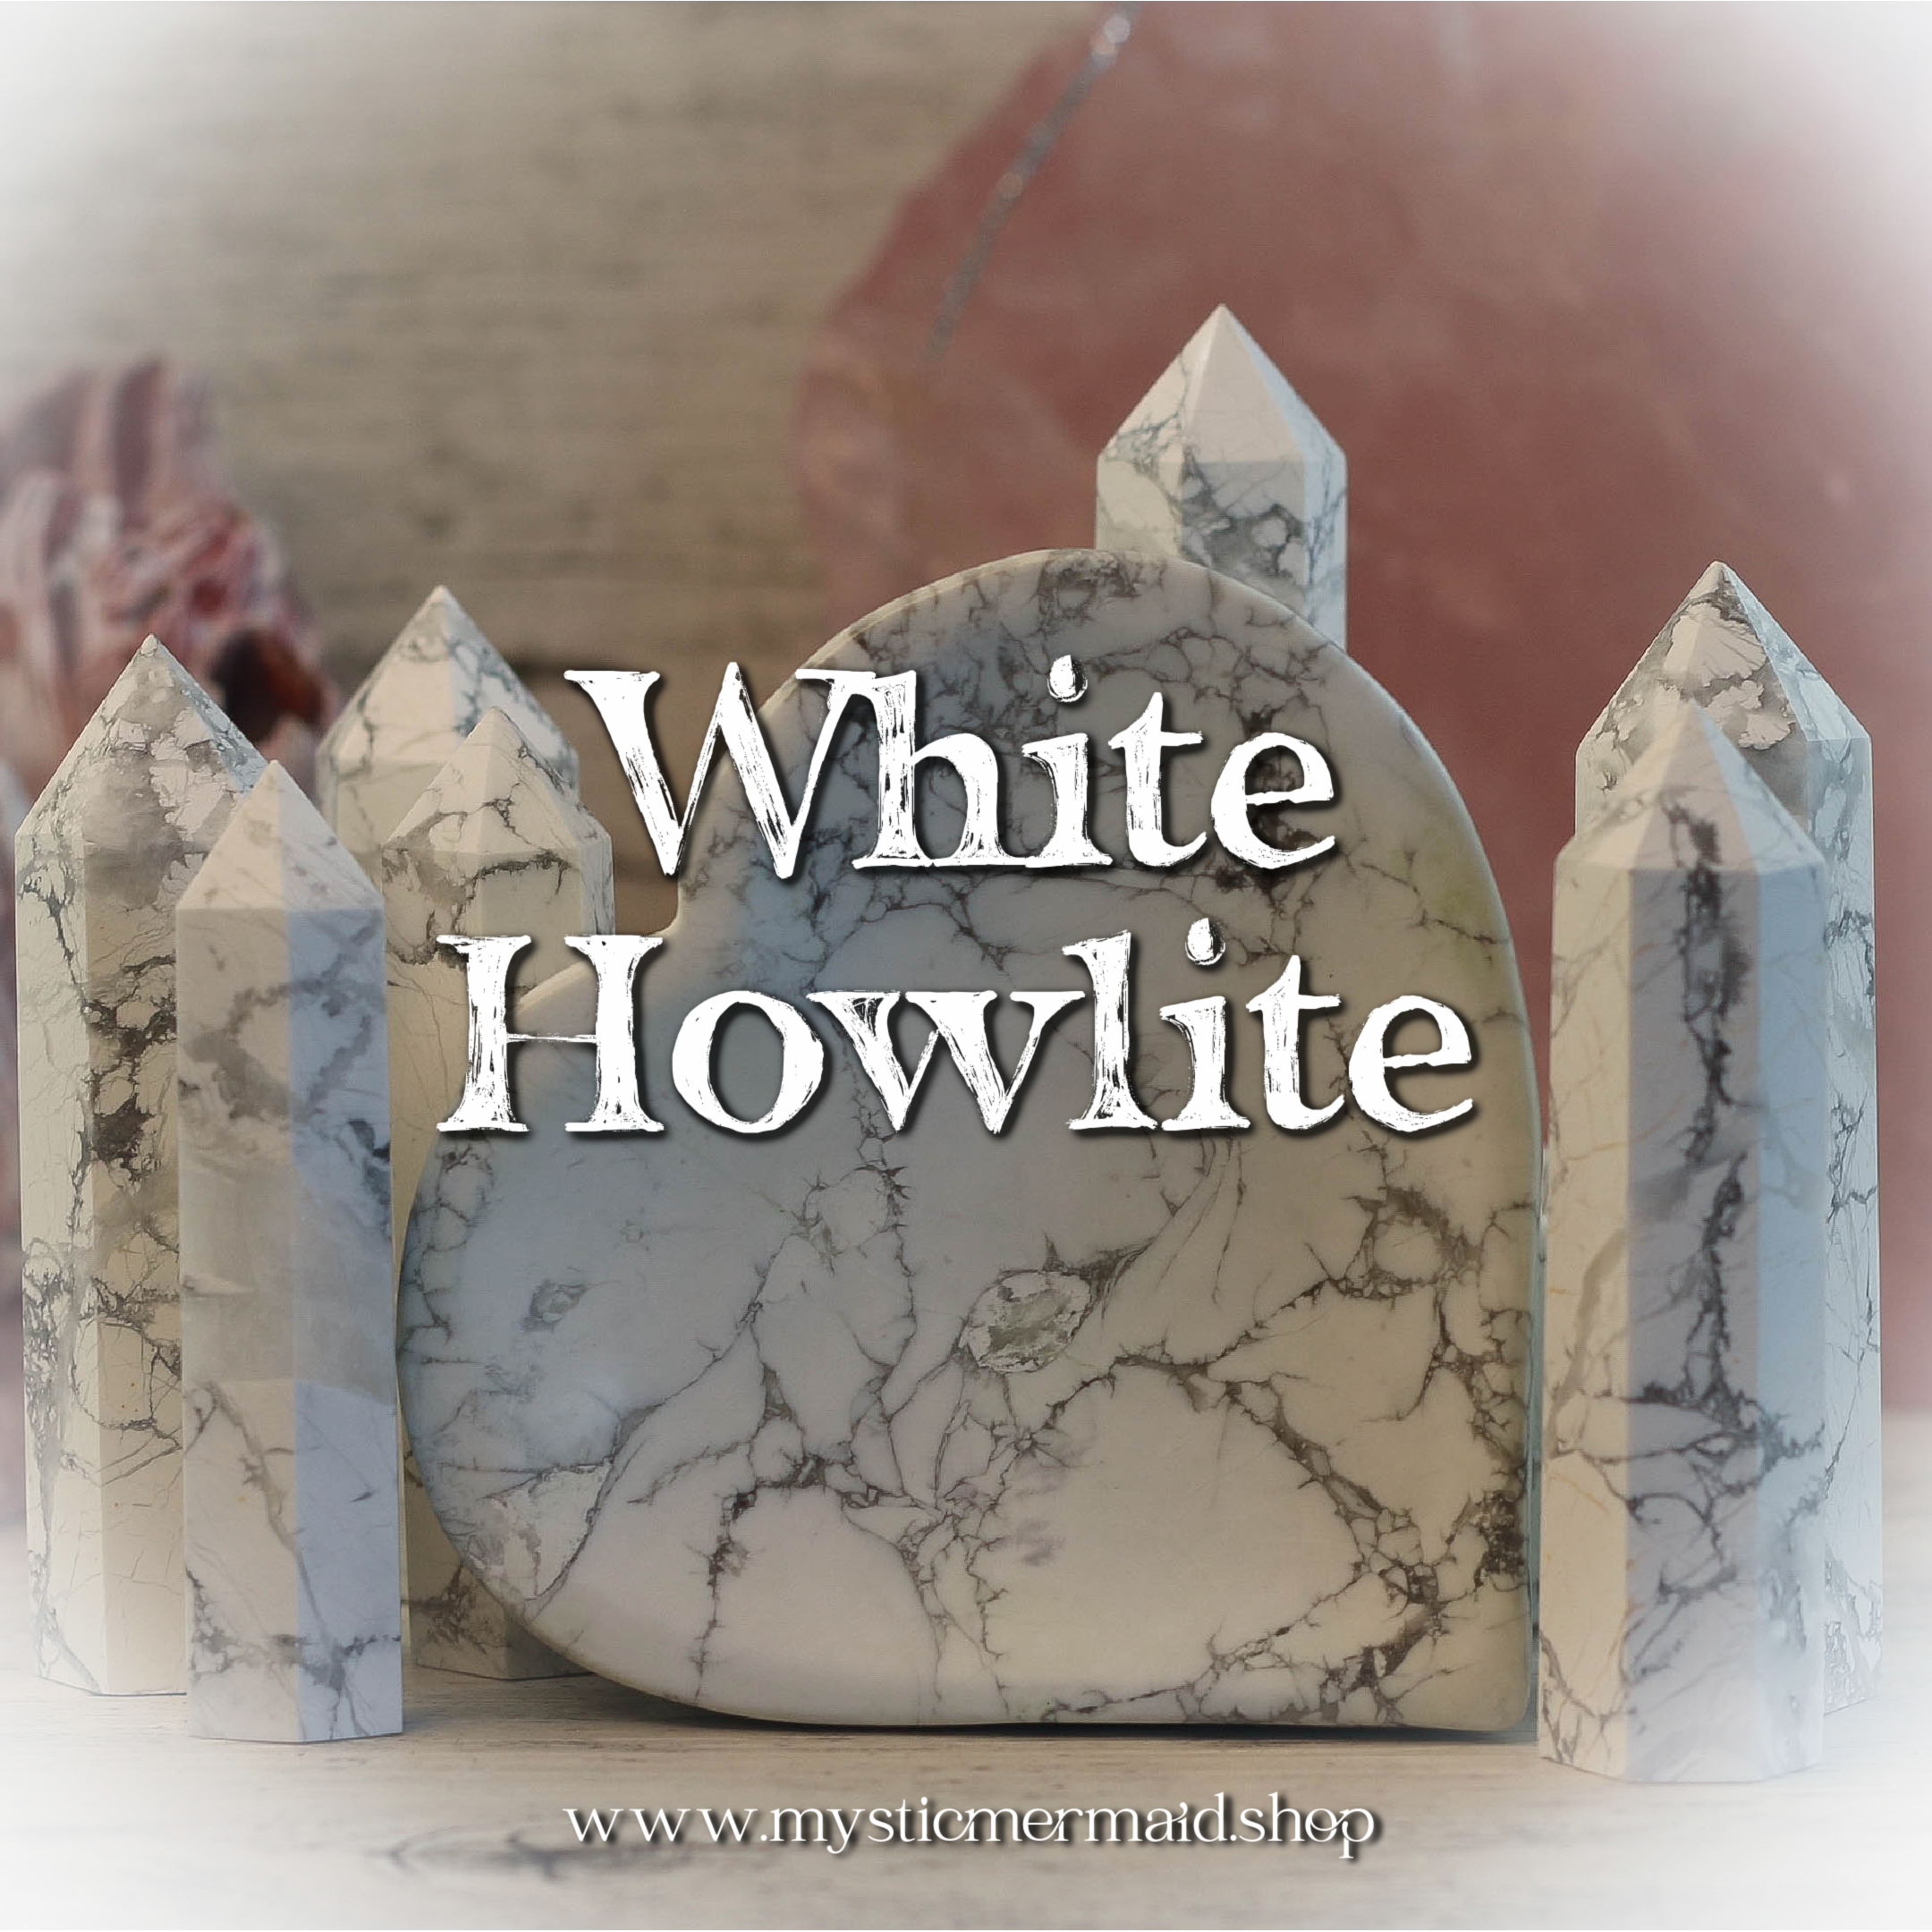 White Howlite Crystals available from Mystic Mermaid